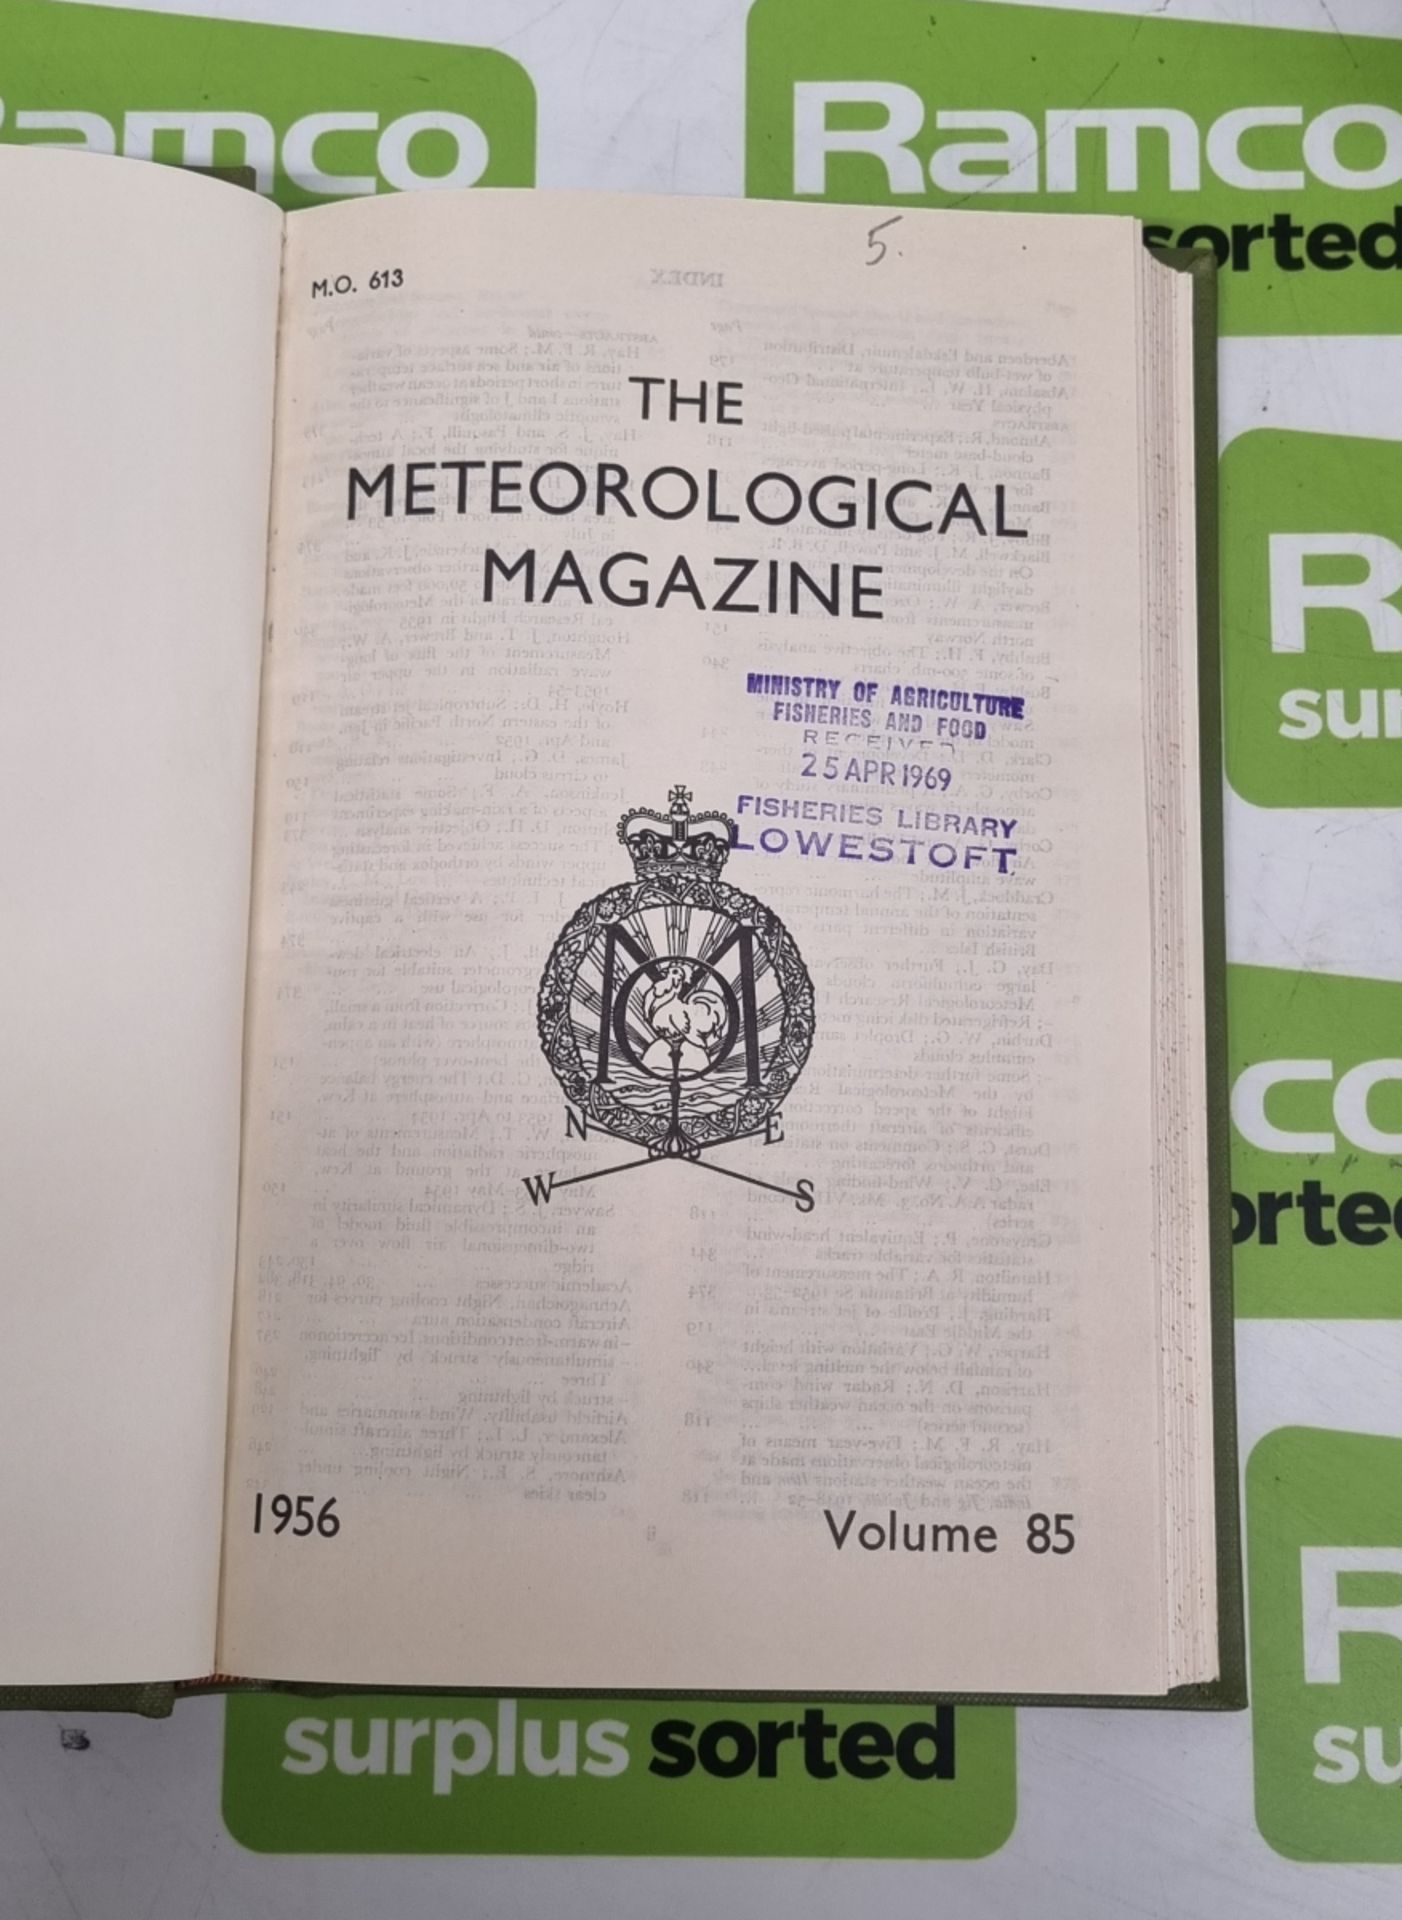 The Meterological Magazine books - Volumes 85 and 90 - Image 3 of 4